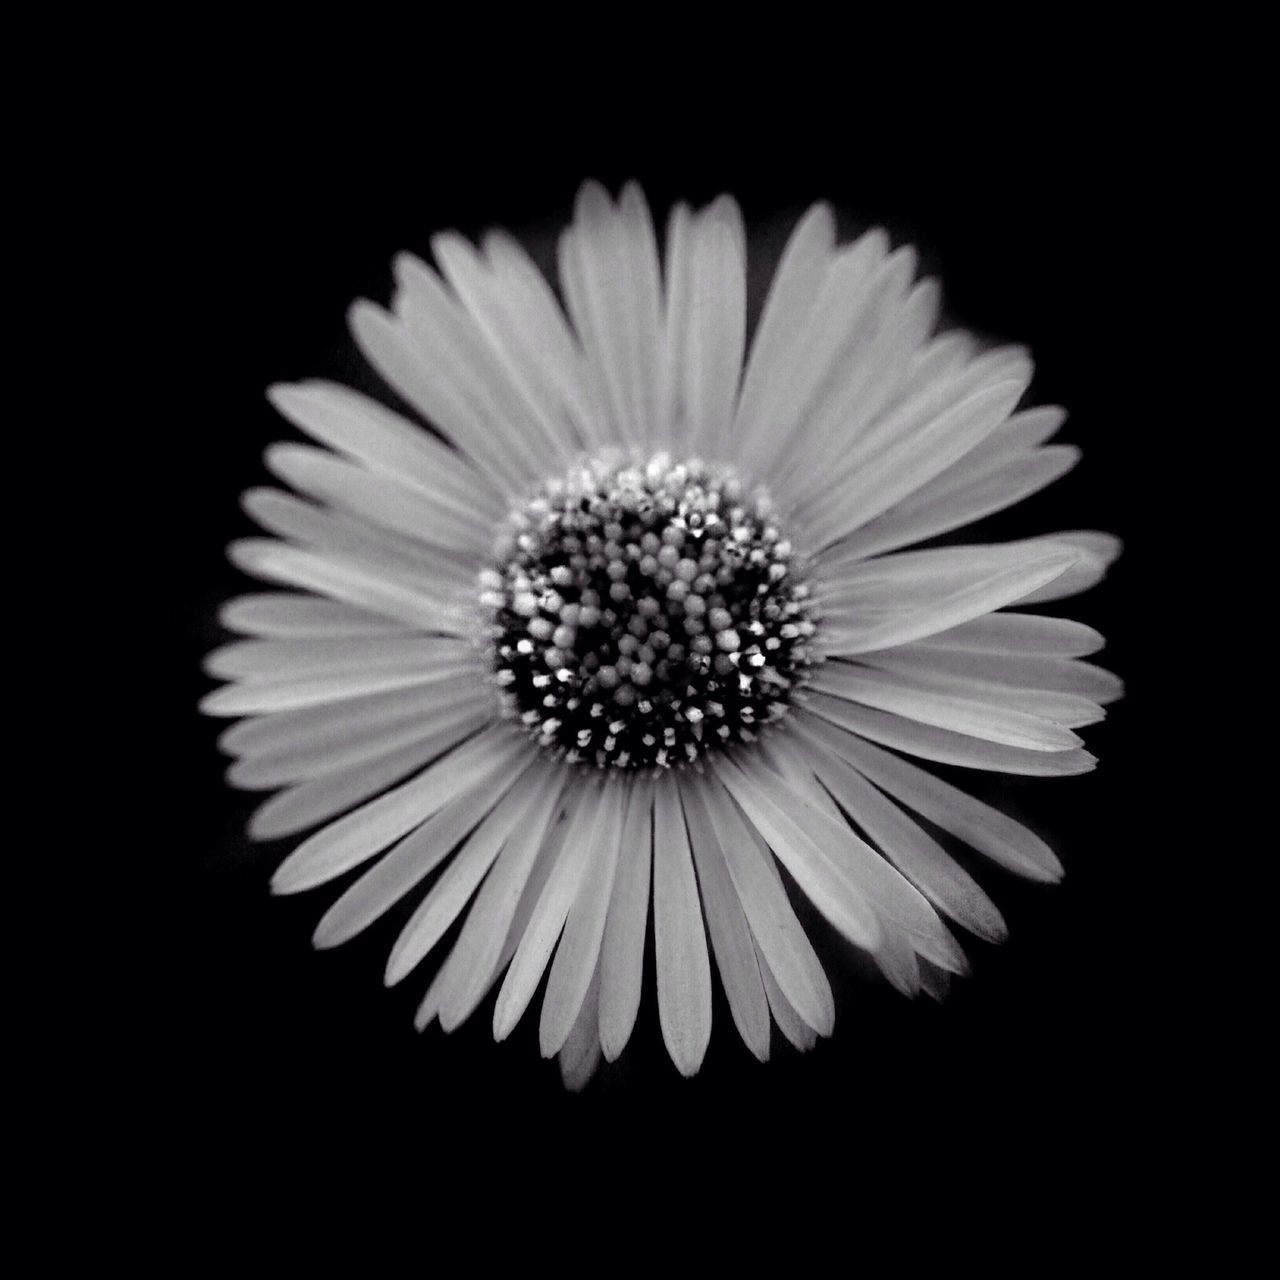 studio shot, black background, flower, flower head, petal, fragility, freshness, close-up, single flower, beauty in nature, copy space, pollen, nature, night, growth, daisy, no people, cut out, white color, blooming